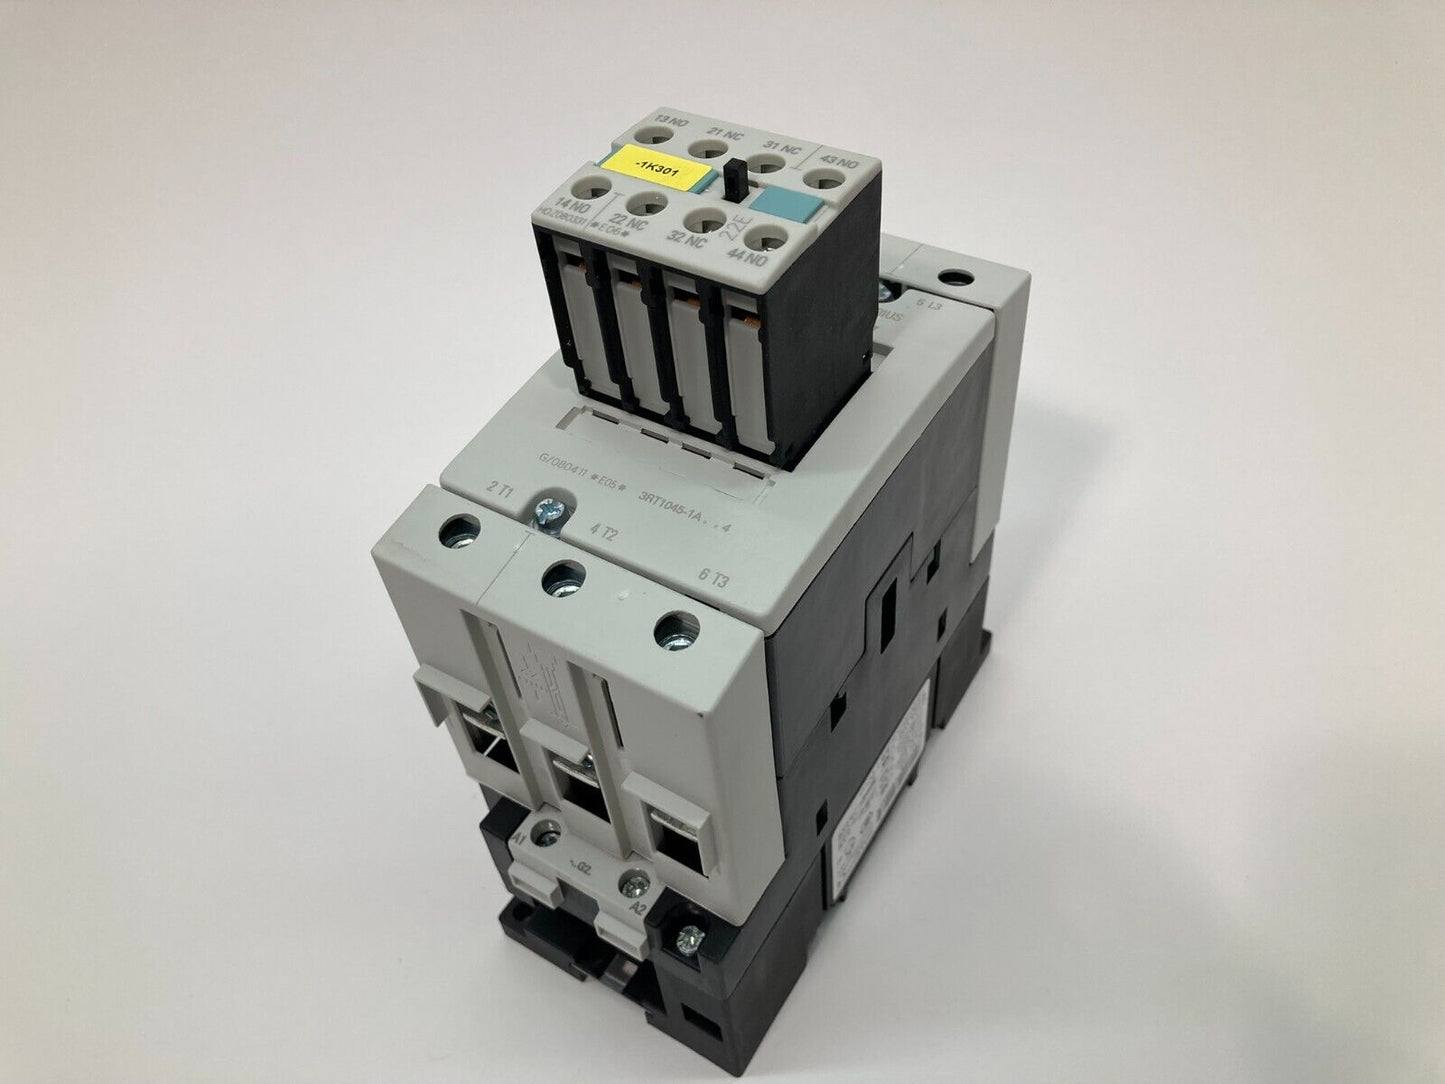 SIEMENS 3RT1045-1A 105A CONTACTOR with 3RH1921-1HA22